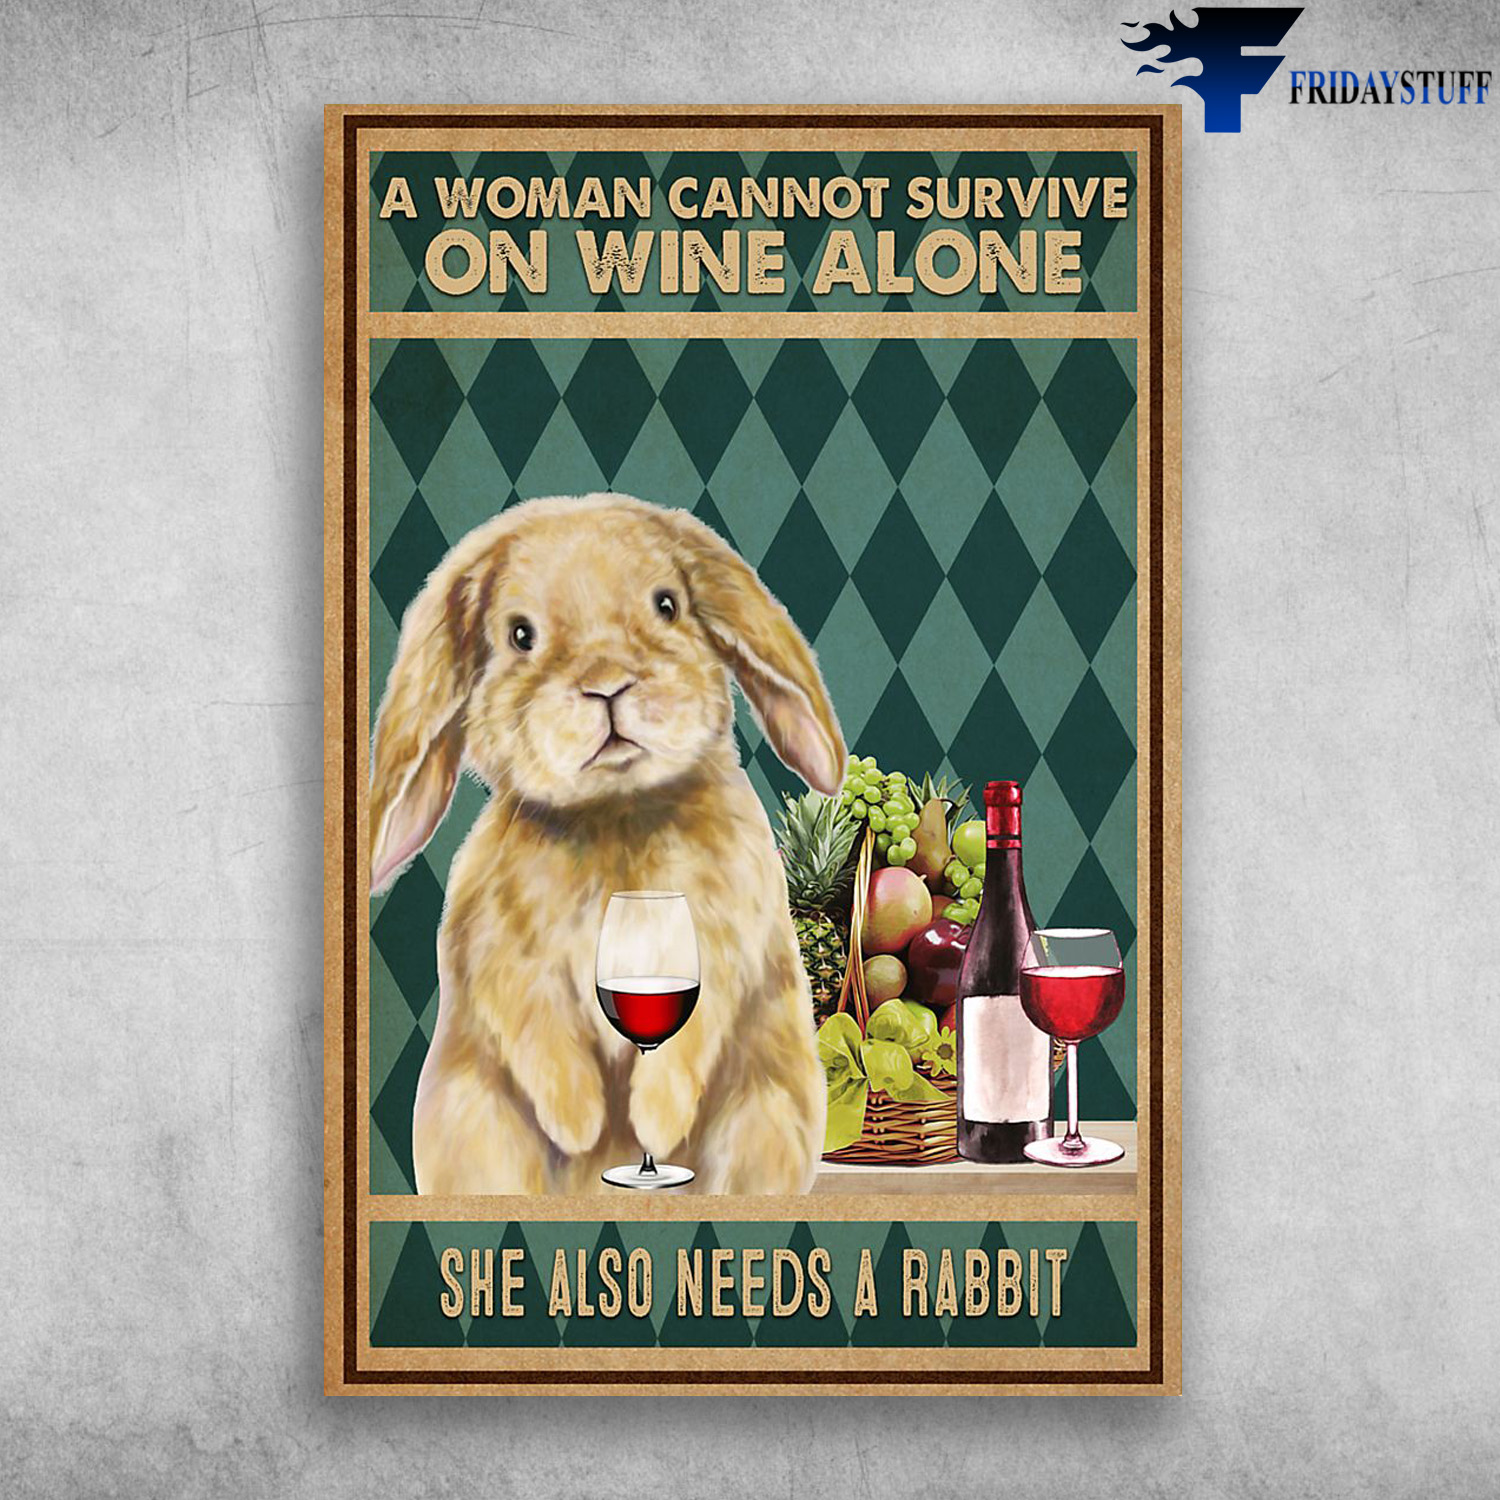 The Rabbit And Wine - A Woman Cannot Survive On Wine Alone, She Also Needs A Rabbit